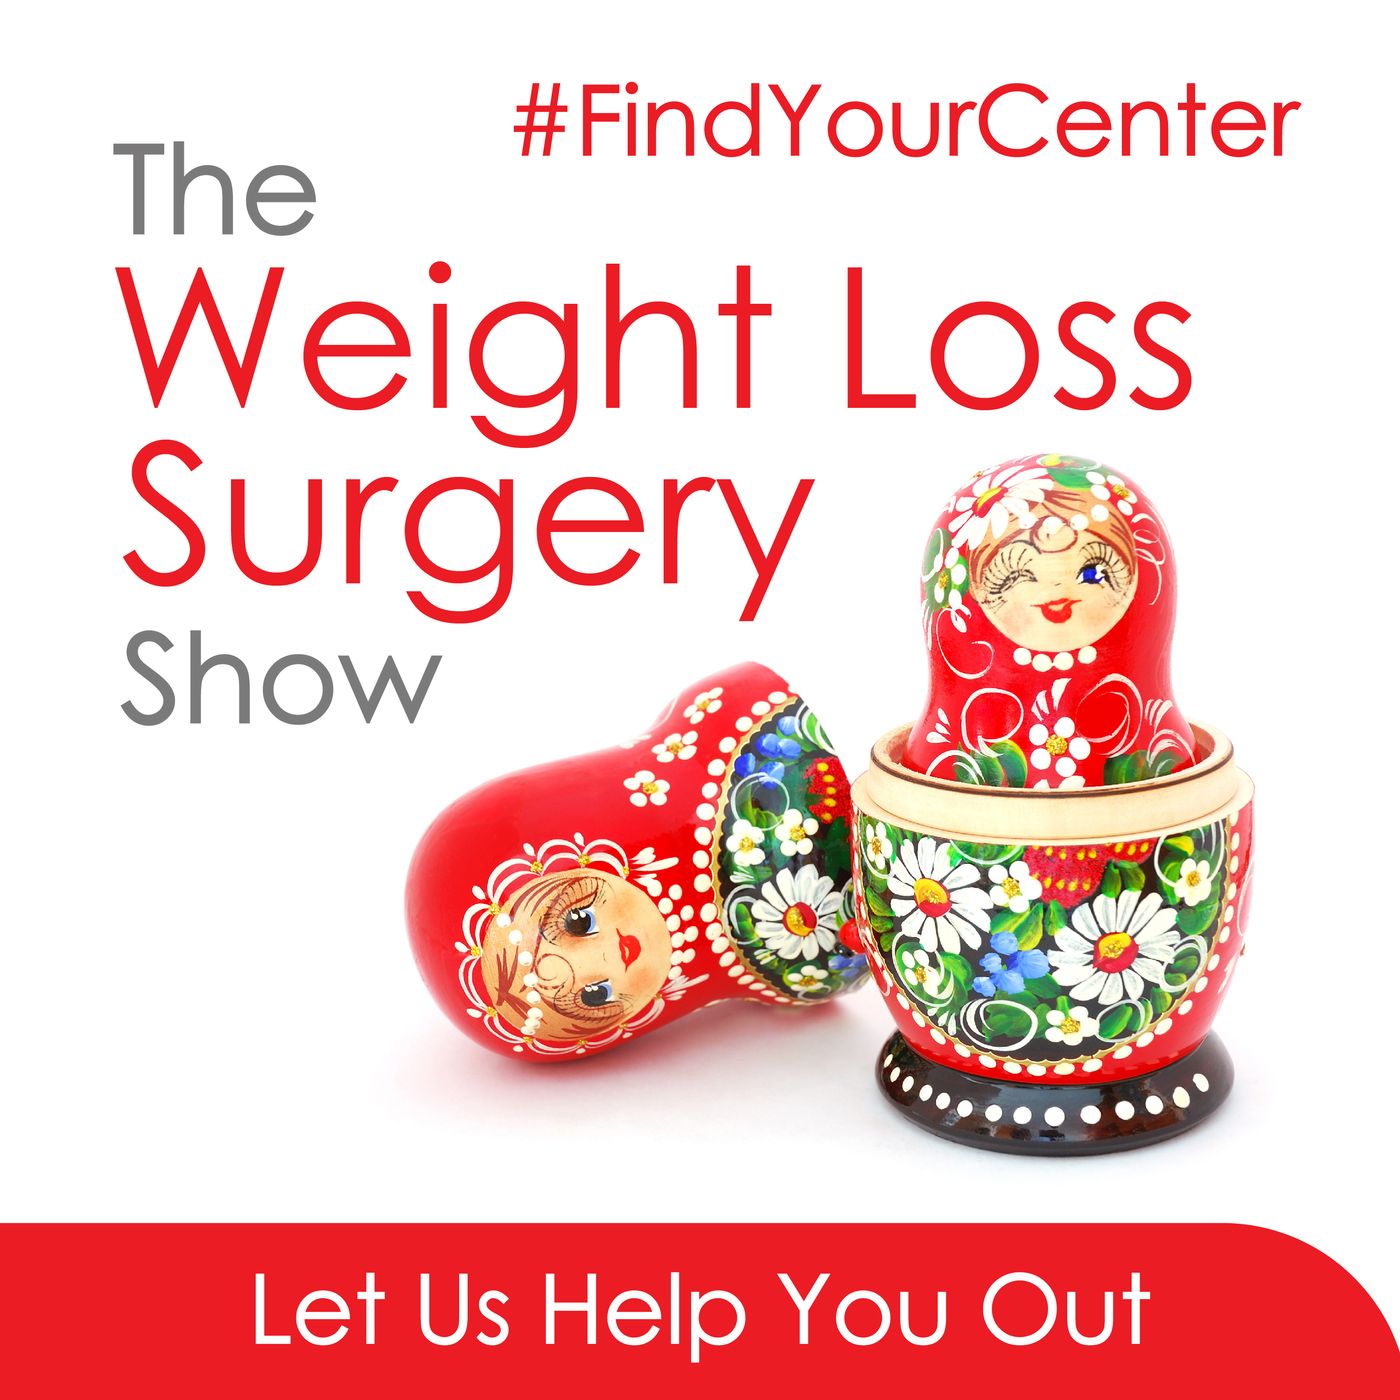 The Weight Loss Surgery Show